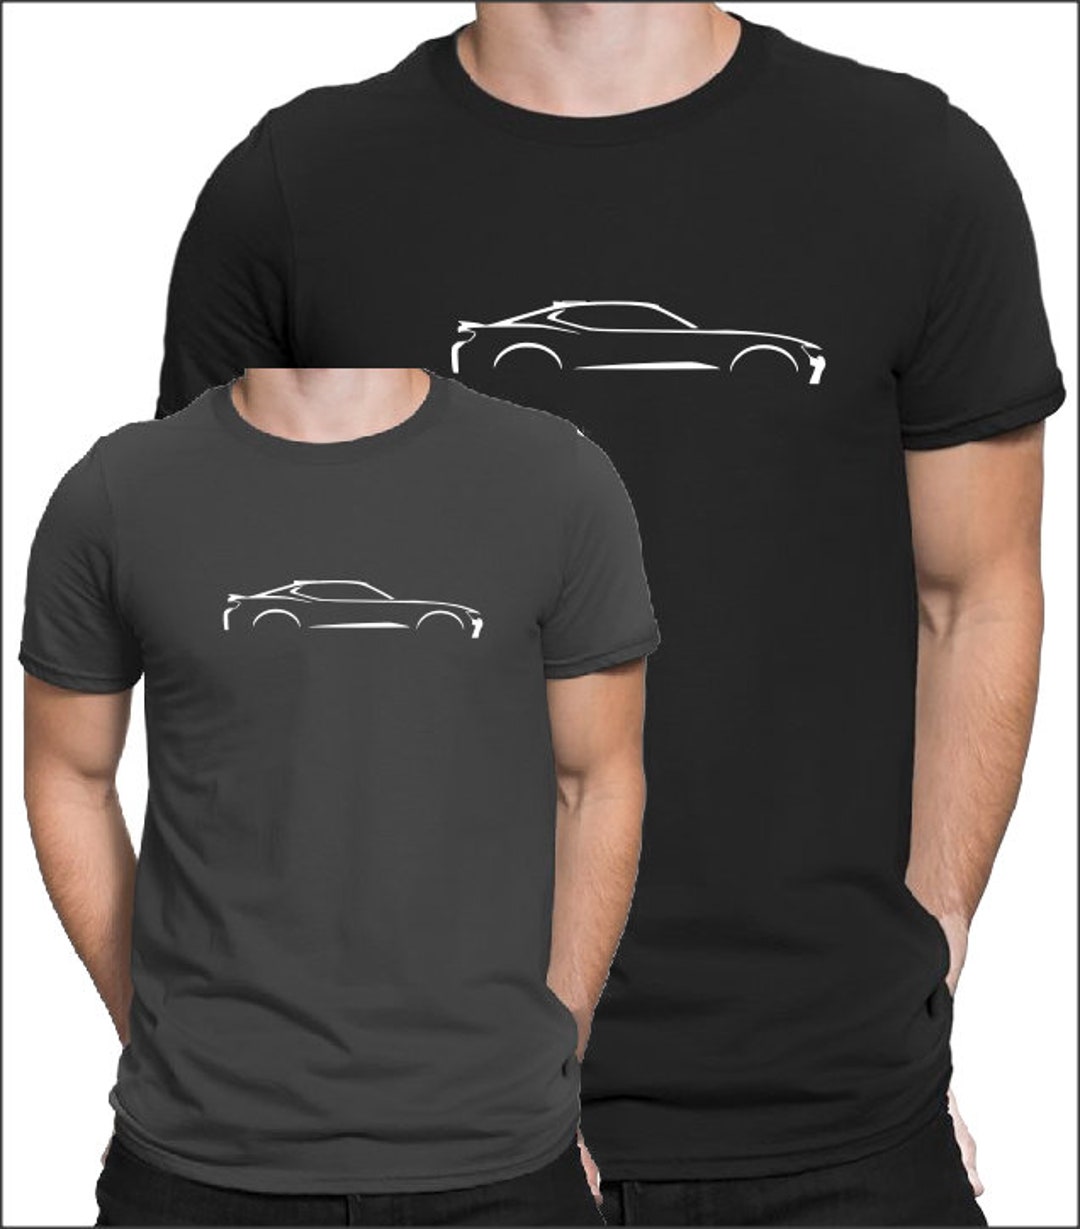 T-shirt for CAMARO Fans Silhouette Chevy Gift Shirt - Etsy